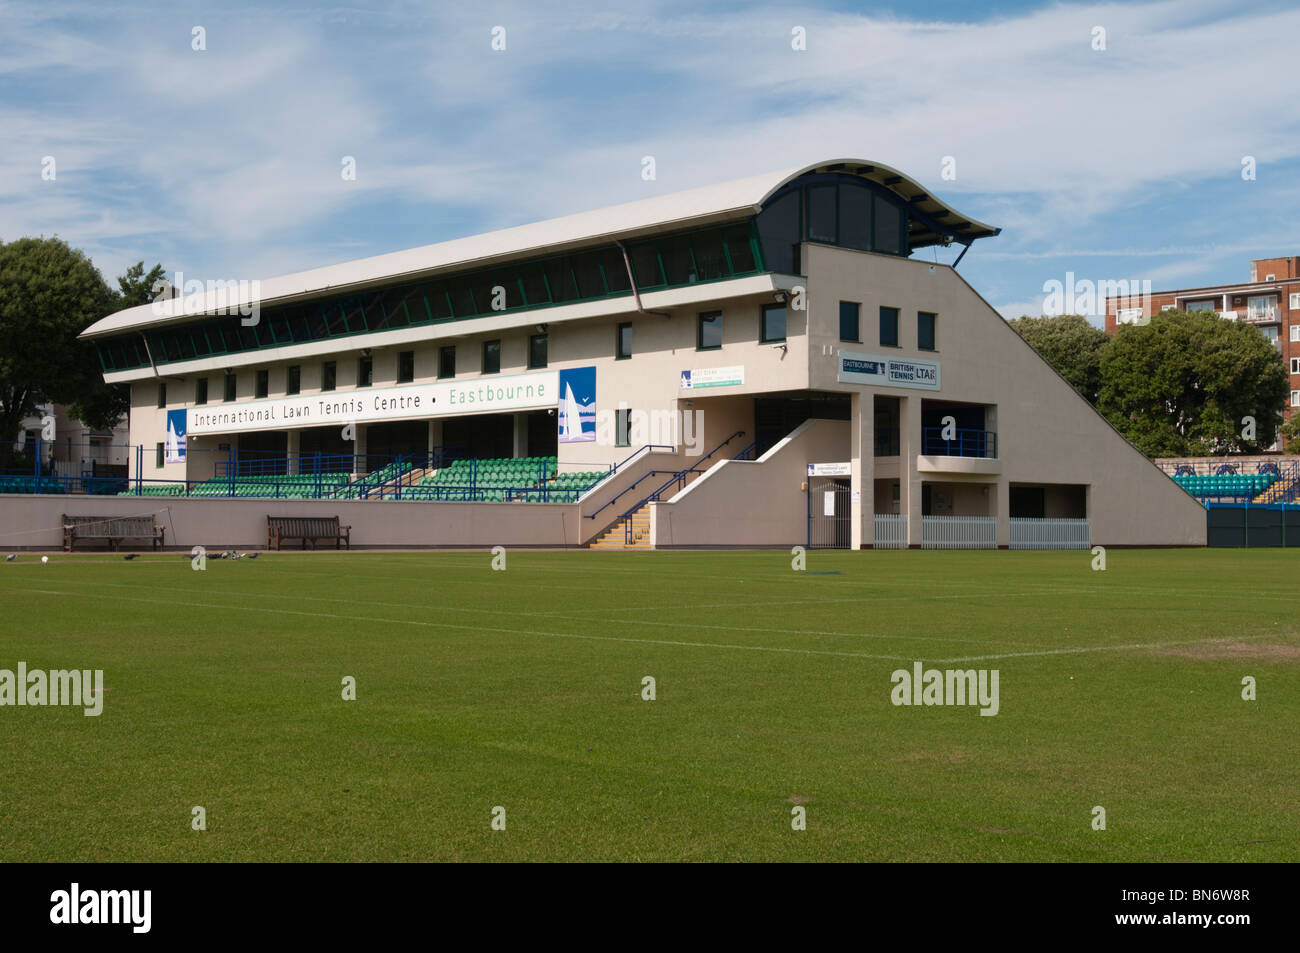 UNITED KINGDOM, ENGLAND - The International Lawn Tennis Centre at Eastbourne. Stock Photo